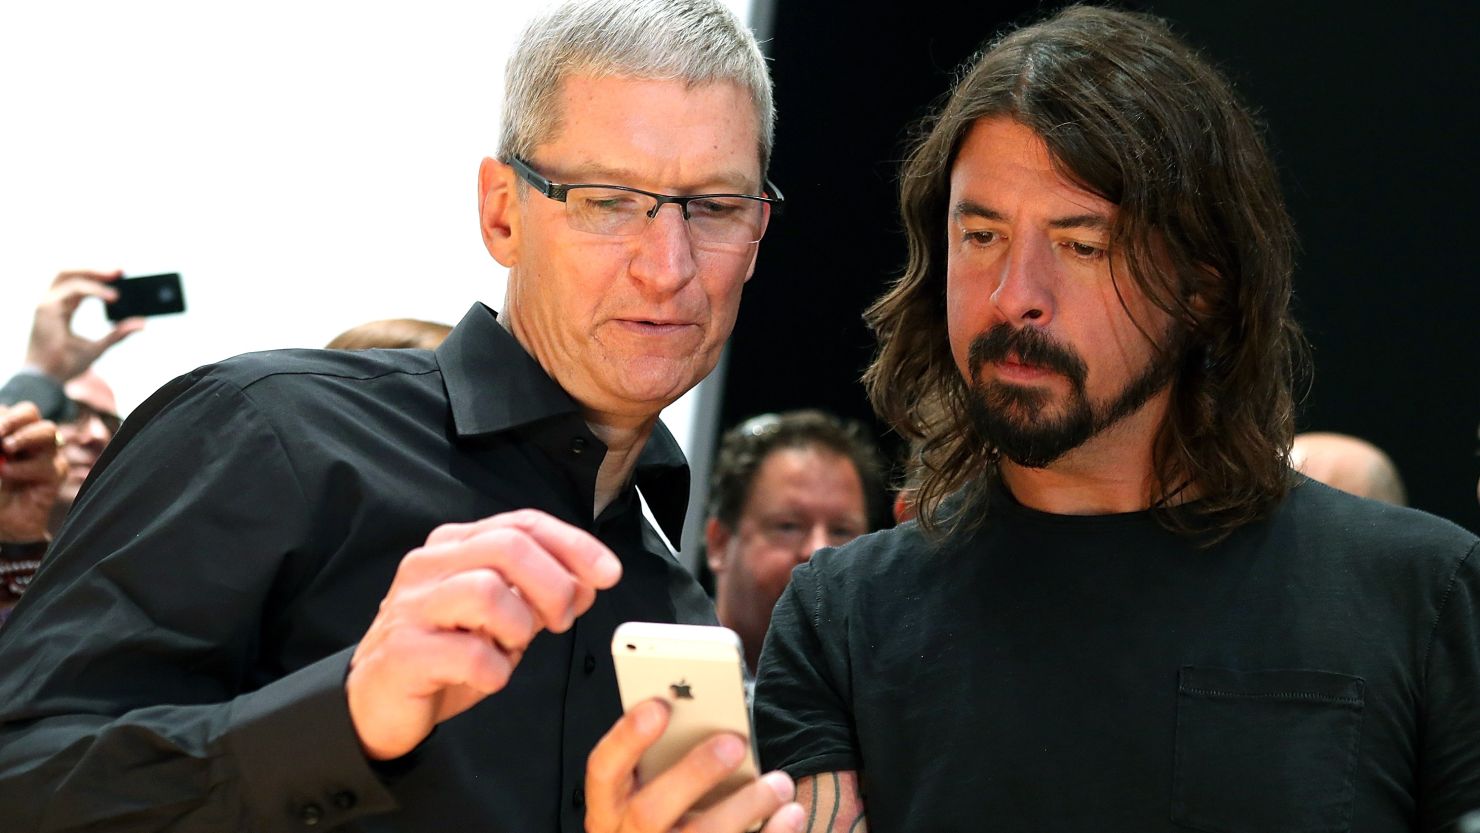 Apple CEO Tim Cook talked iPhone 5 with musician Dave Grohl in September. For a hefty sum, you can chat with Cook, too.